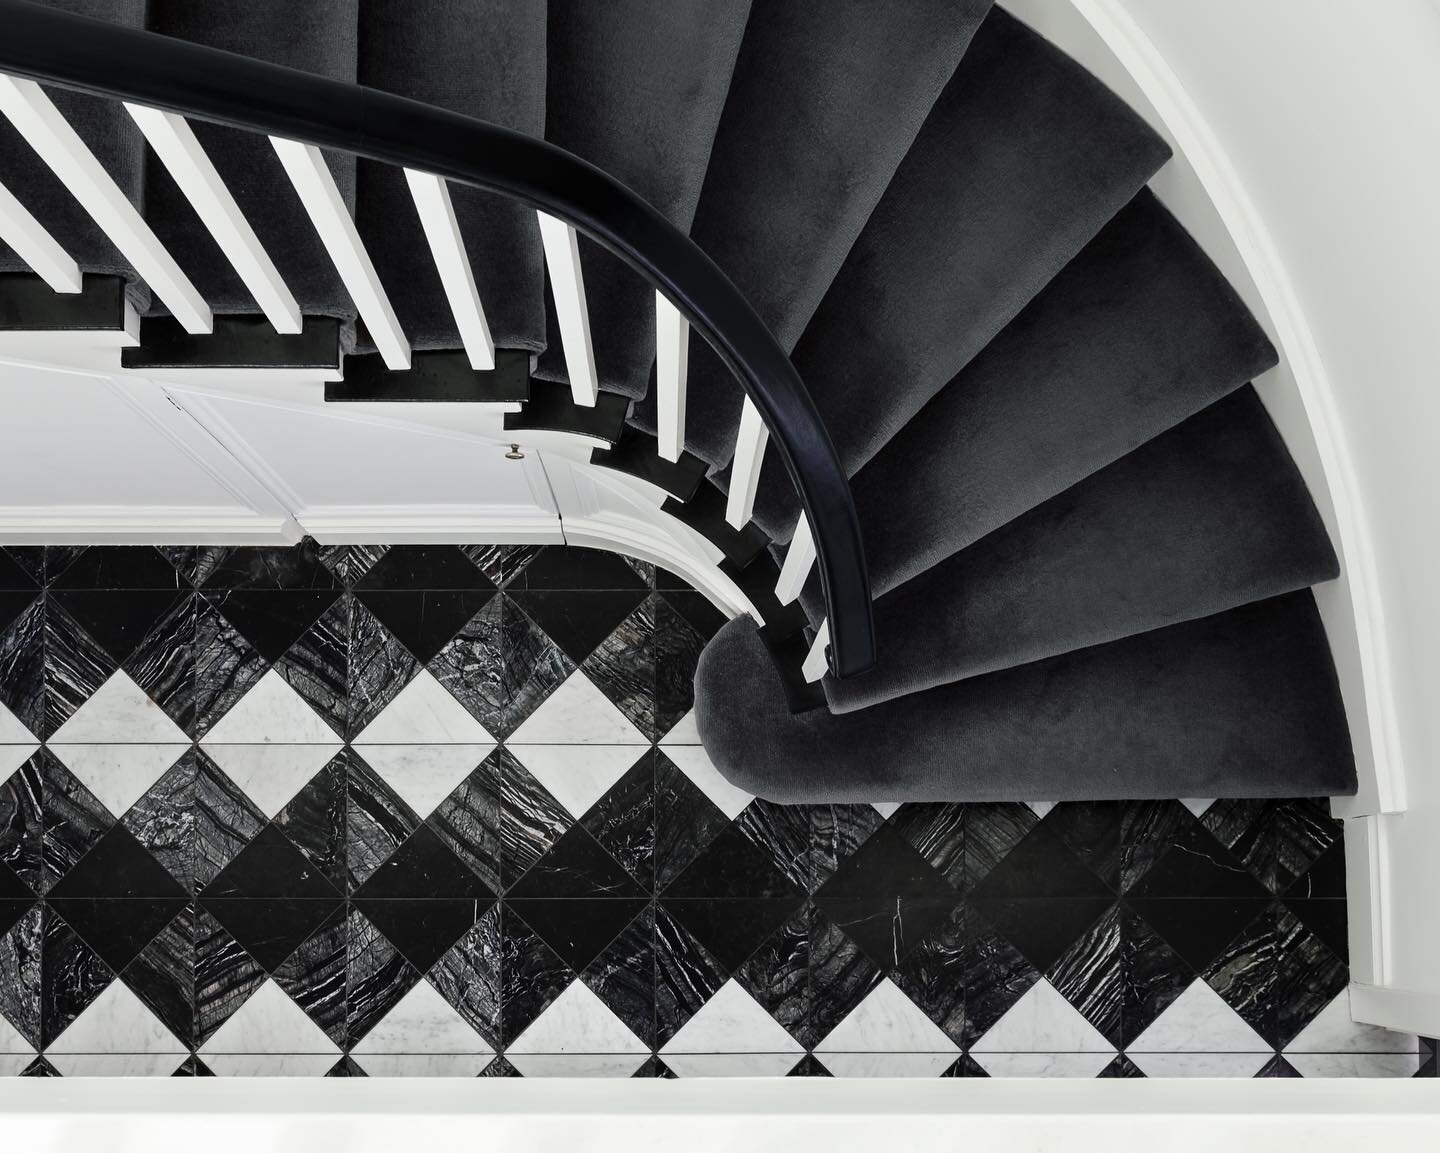 The curved staircase and feature marble floor come together to create bold, monochromatic drama at the entry of #RupertsResidence. 

Here we reference the classic black and white marble feature flooring of the past, but with a contemporary touch - th